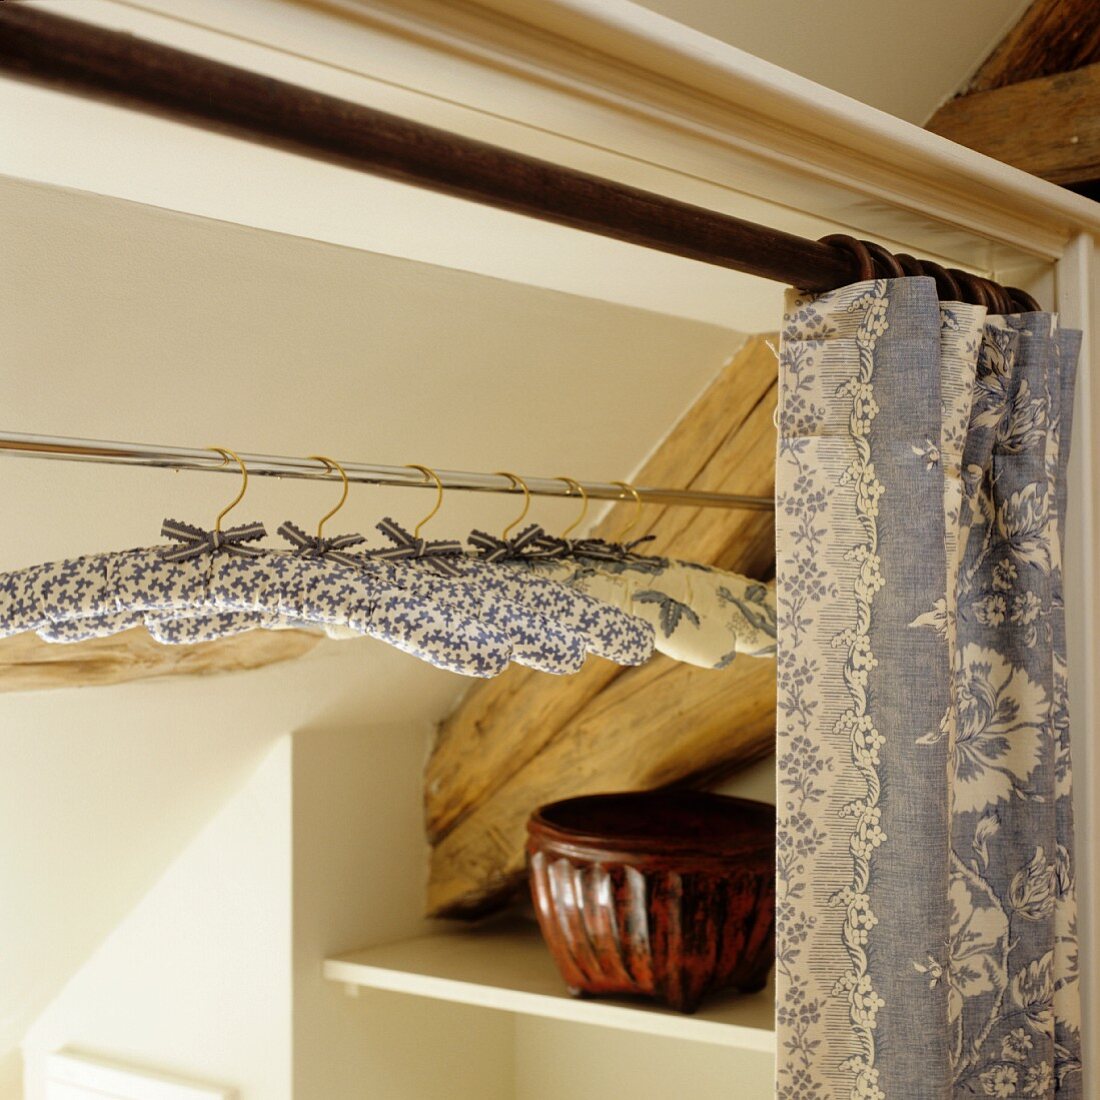 Fabric-covered coathangers on clothes rack behind open curtain